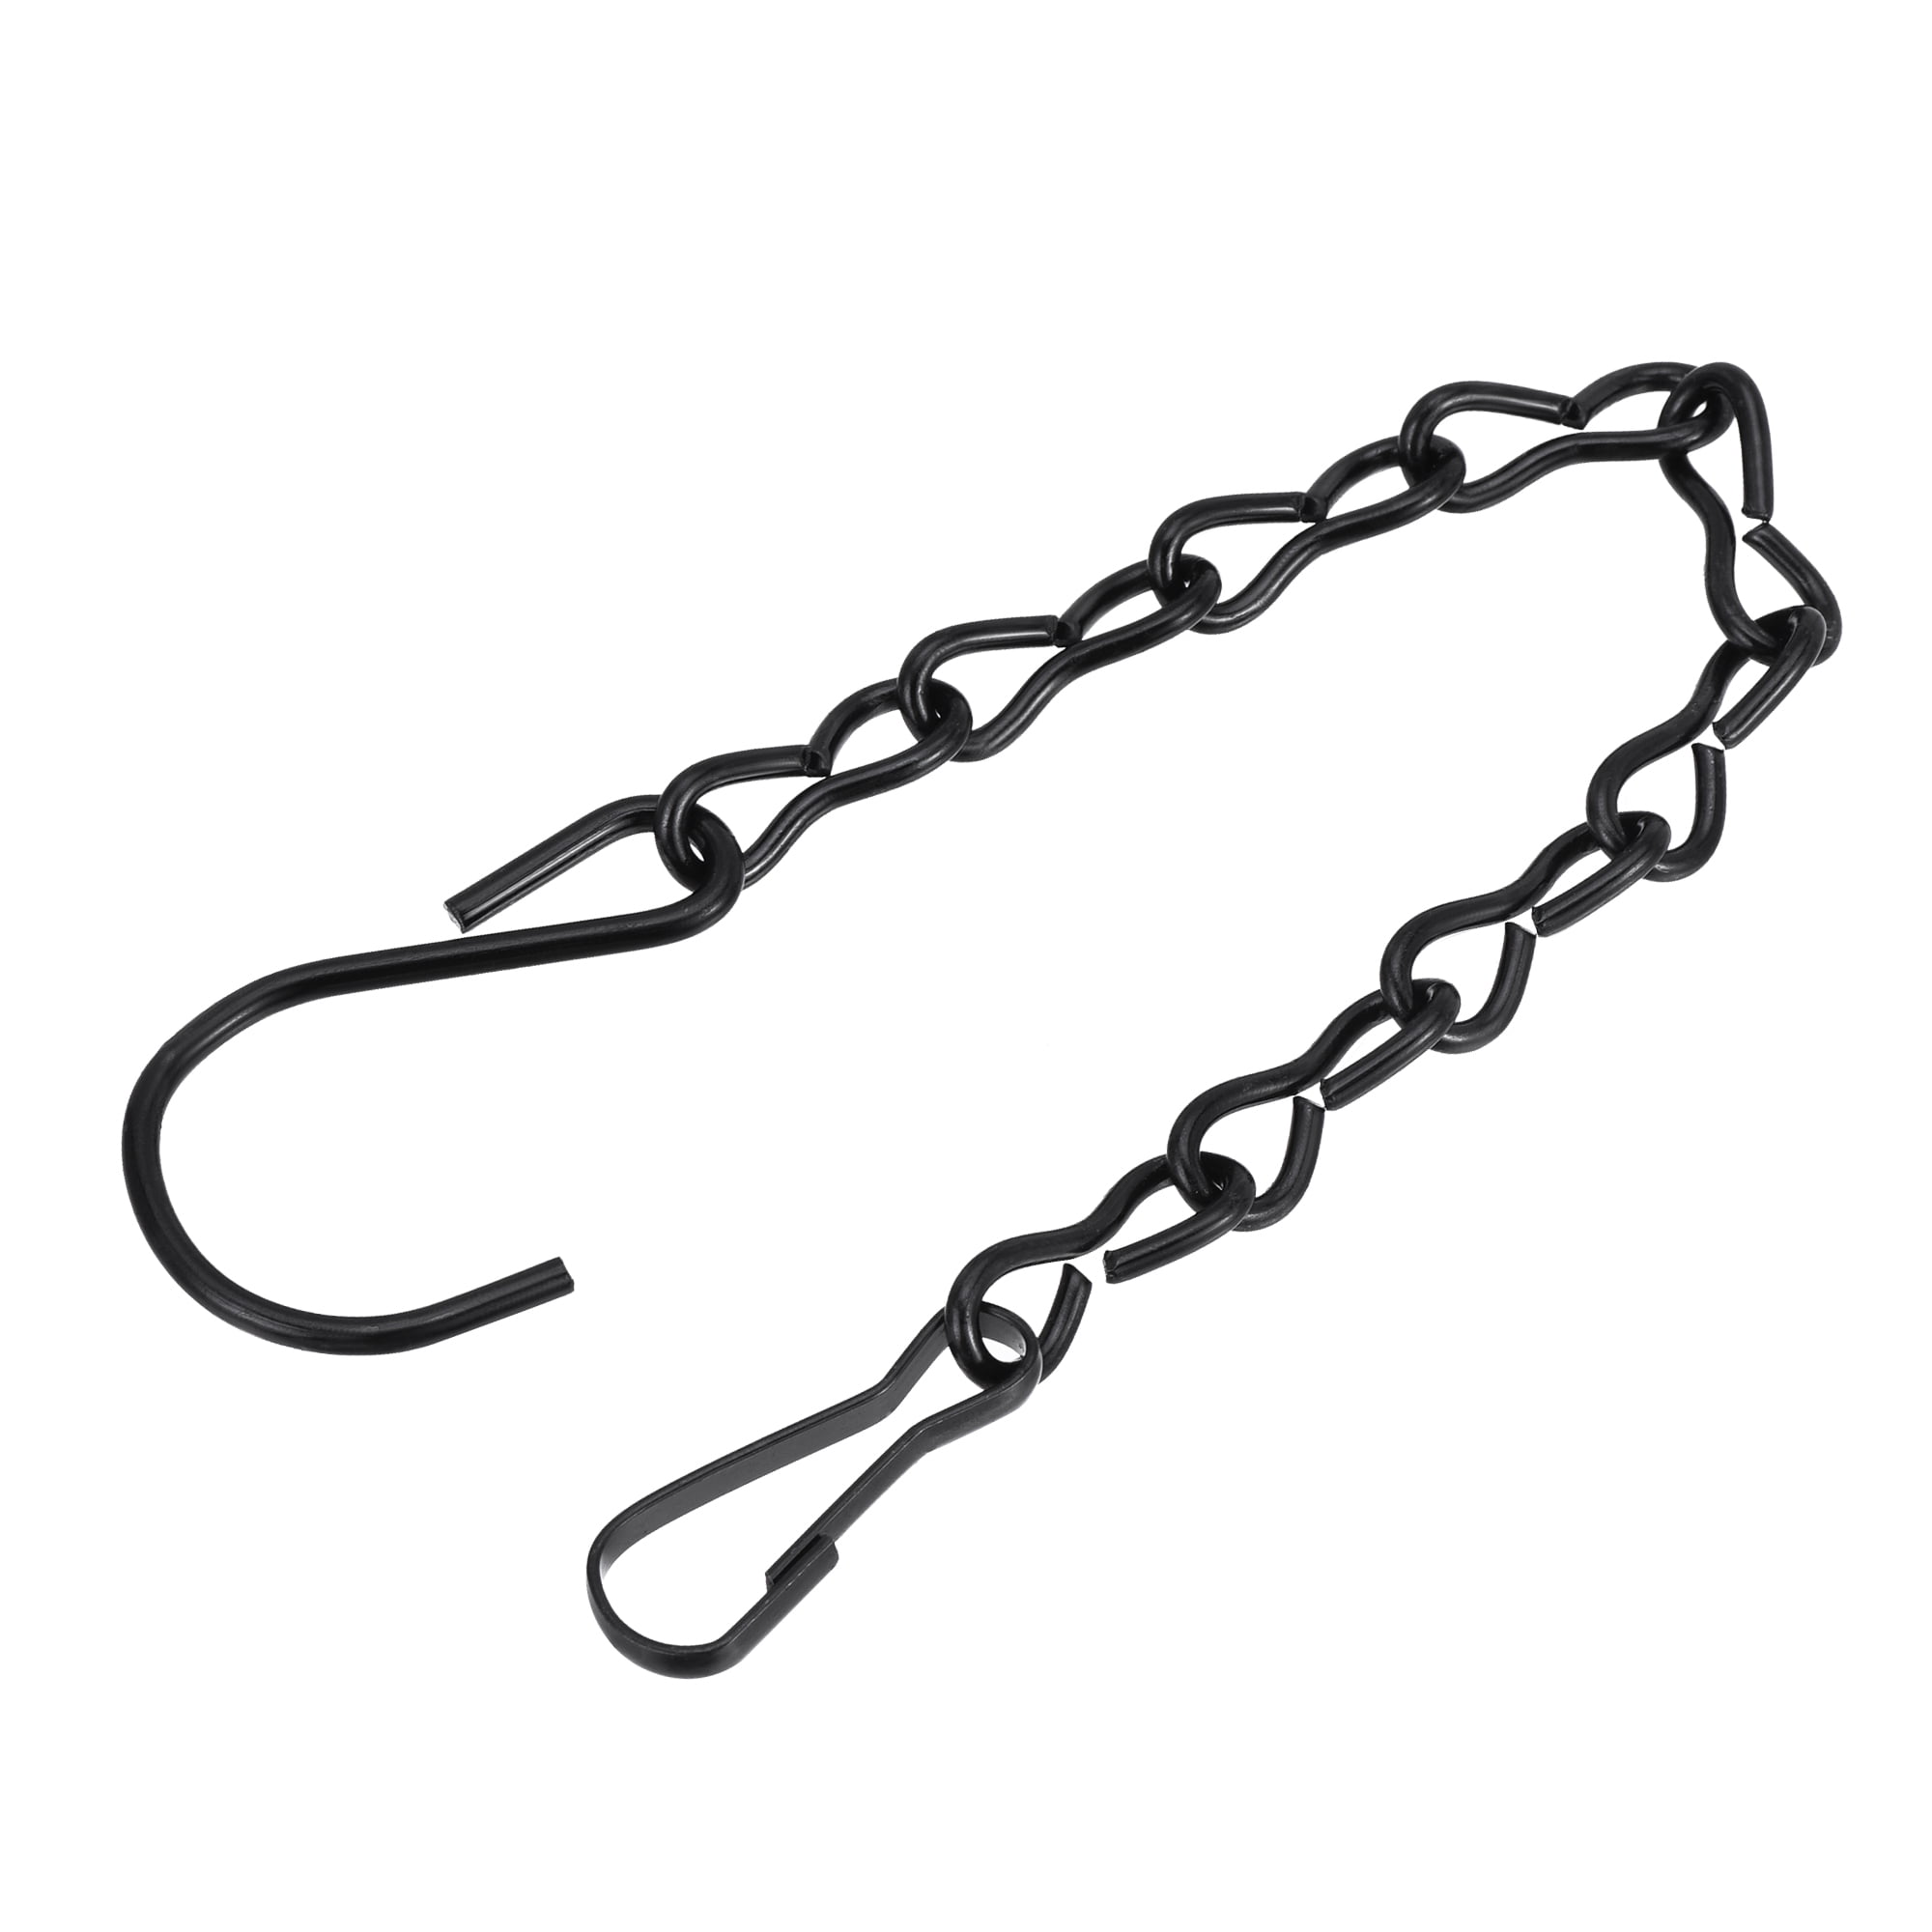 Uxcell 24cm Extension Lighting Chain S Hook Hanging Chains Black 8 Pack 